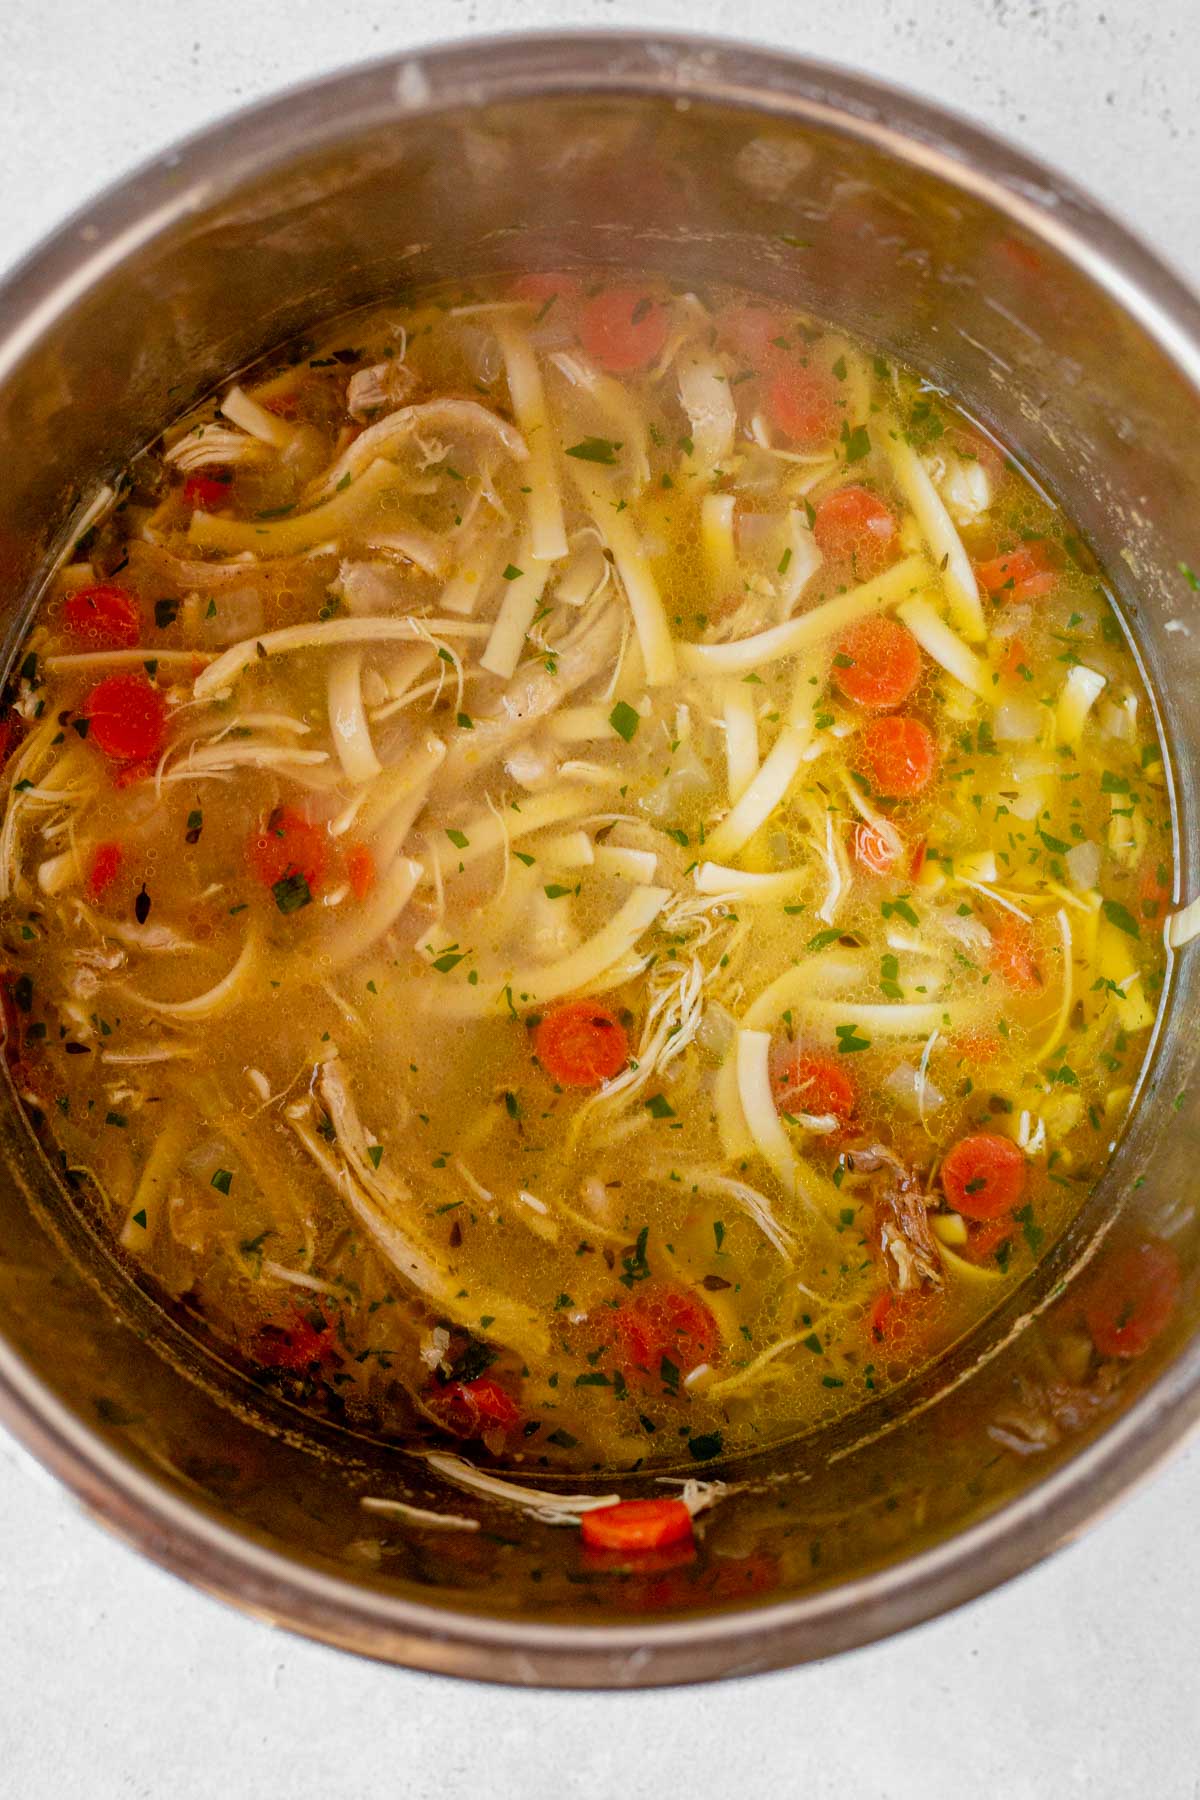 https://storables.com/wp-content/uploads/2023/07/how-to-cook-chicken-soup-in-a-seven-and-a-half-quart-electric-pressure-cooker-bistro-wolfgang-puck-1690714488.jpg